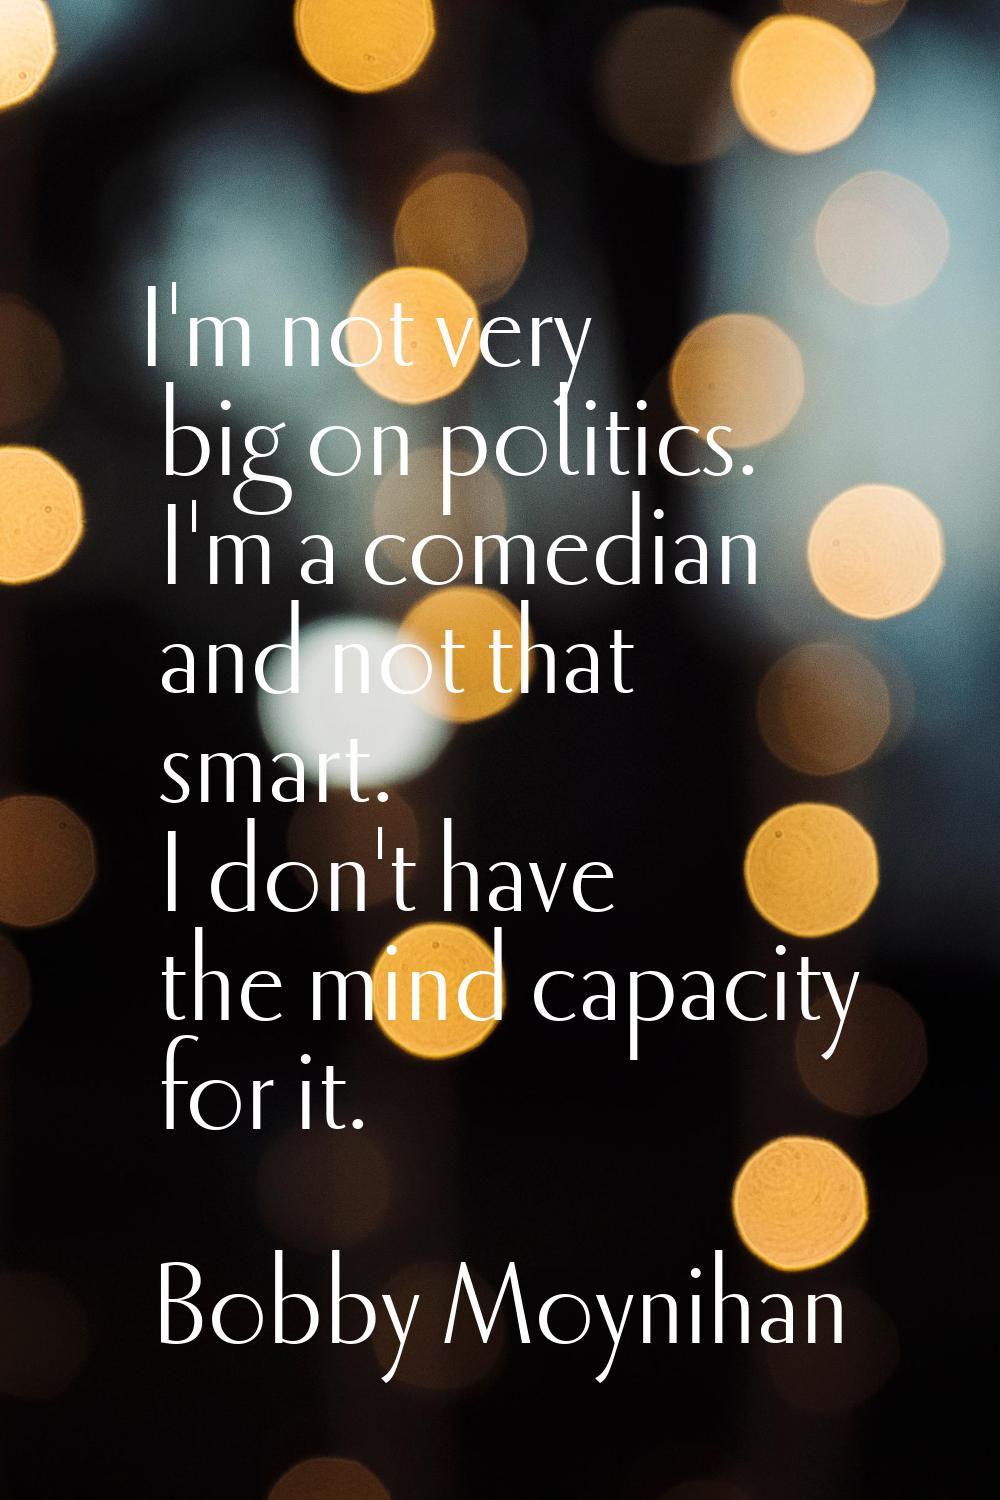 I'm not very big on politics. I'm a comedian and not that smart. I don't have the mind capacity for